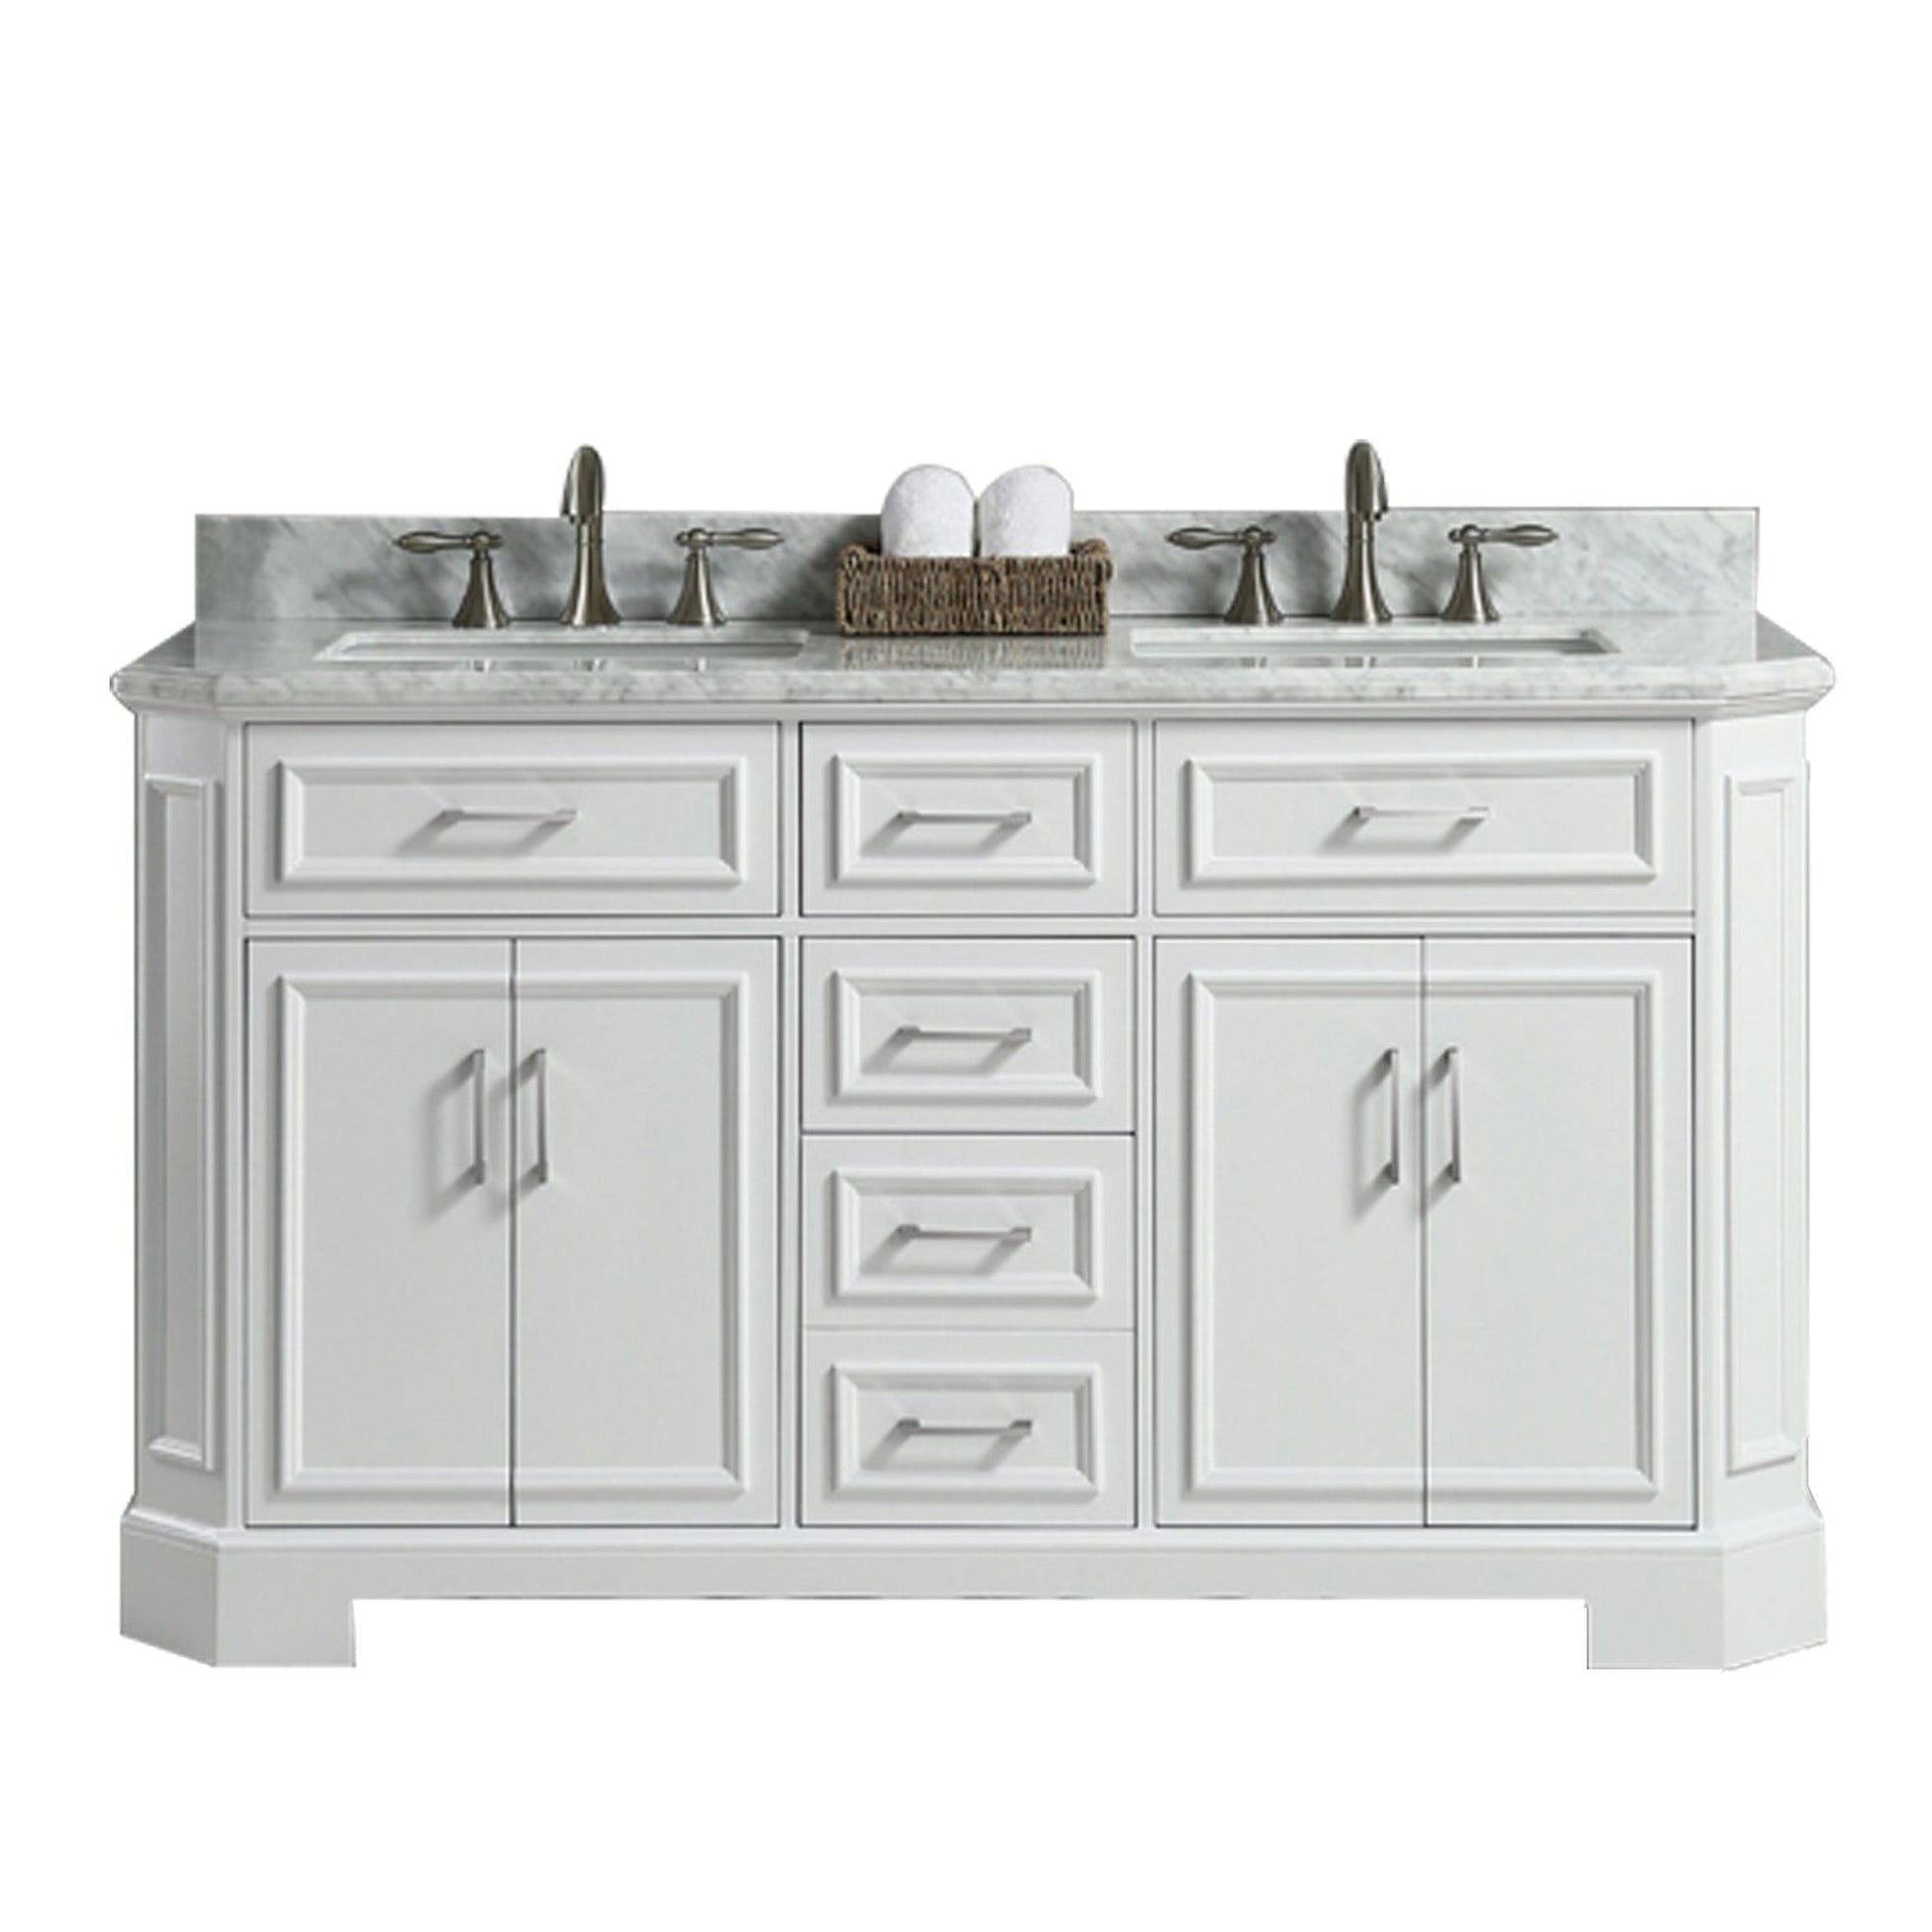 Eviva Glory 60" x 33" White Bathroom Vanity With Carrara Marble Countertop and Double Porcelain Sink